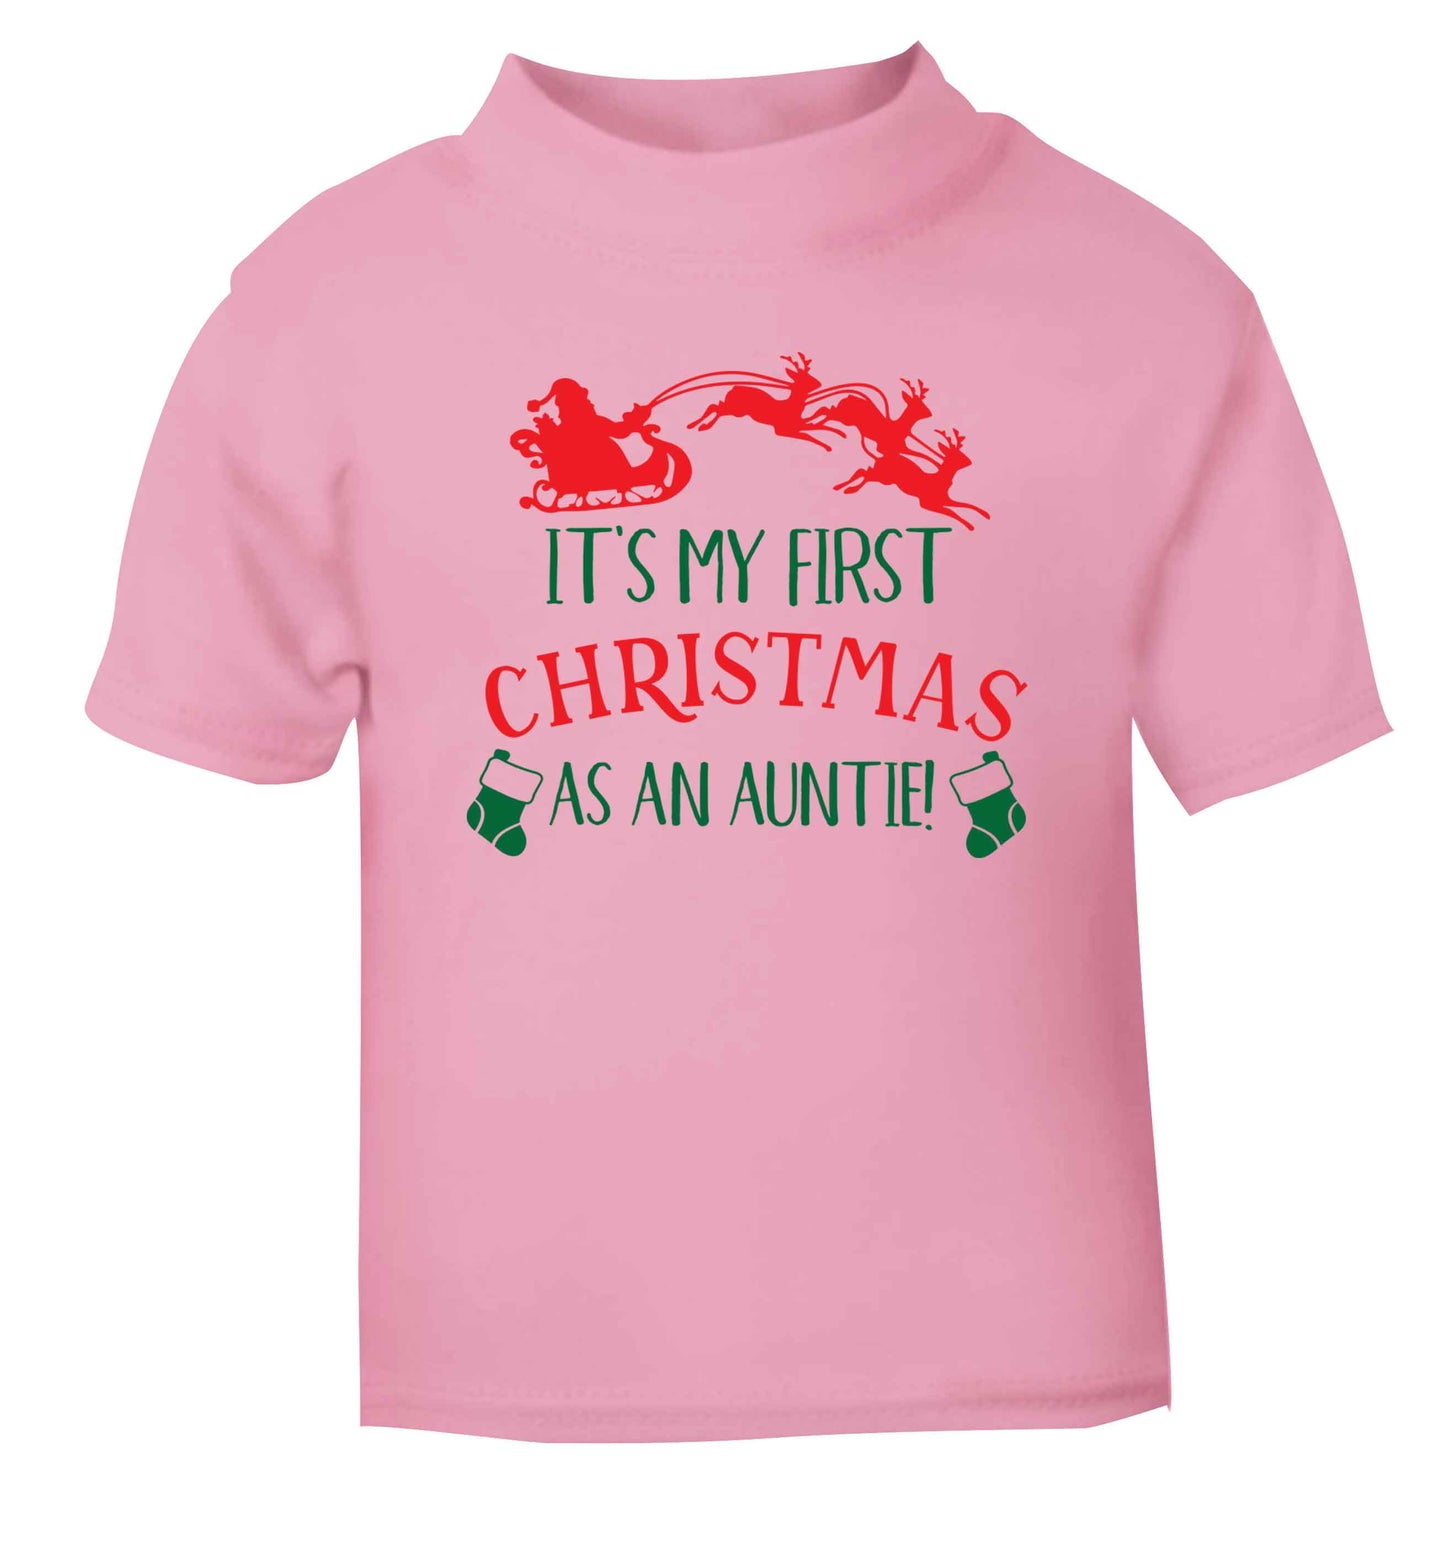 It's my first Christmas as an auntie! light pink Baby Toddler Tshirt 2 Years